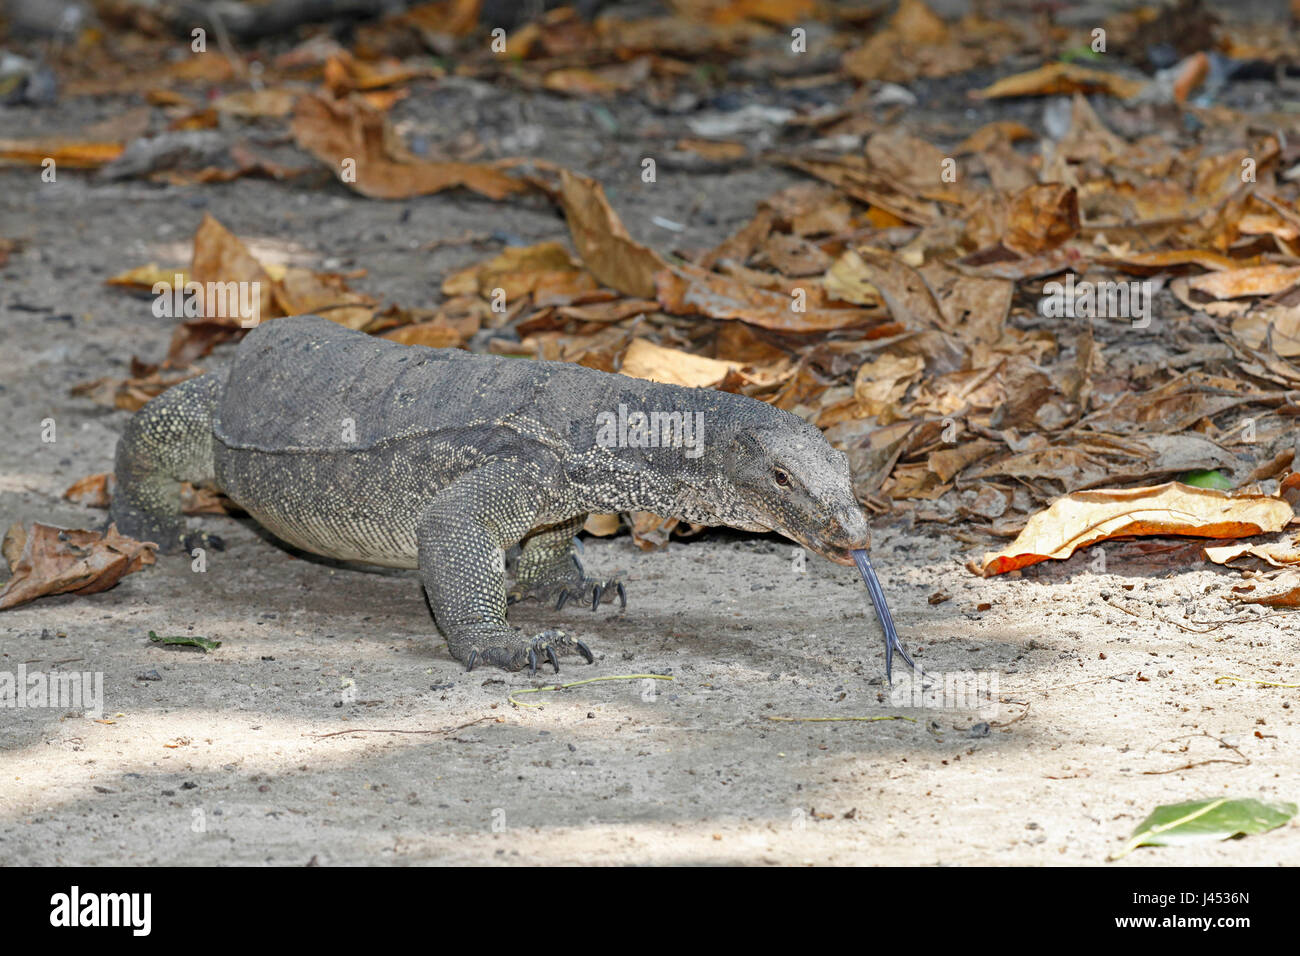 photo of a water monitor, one of the largest species of lizards on earth Stock Photo